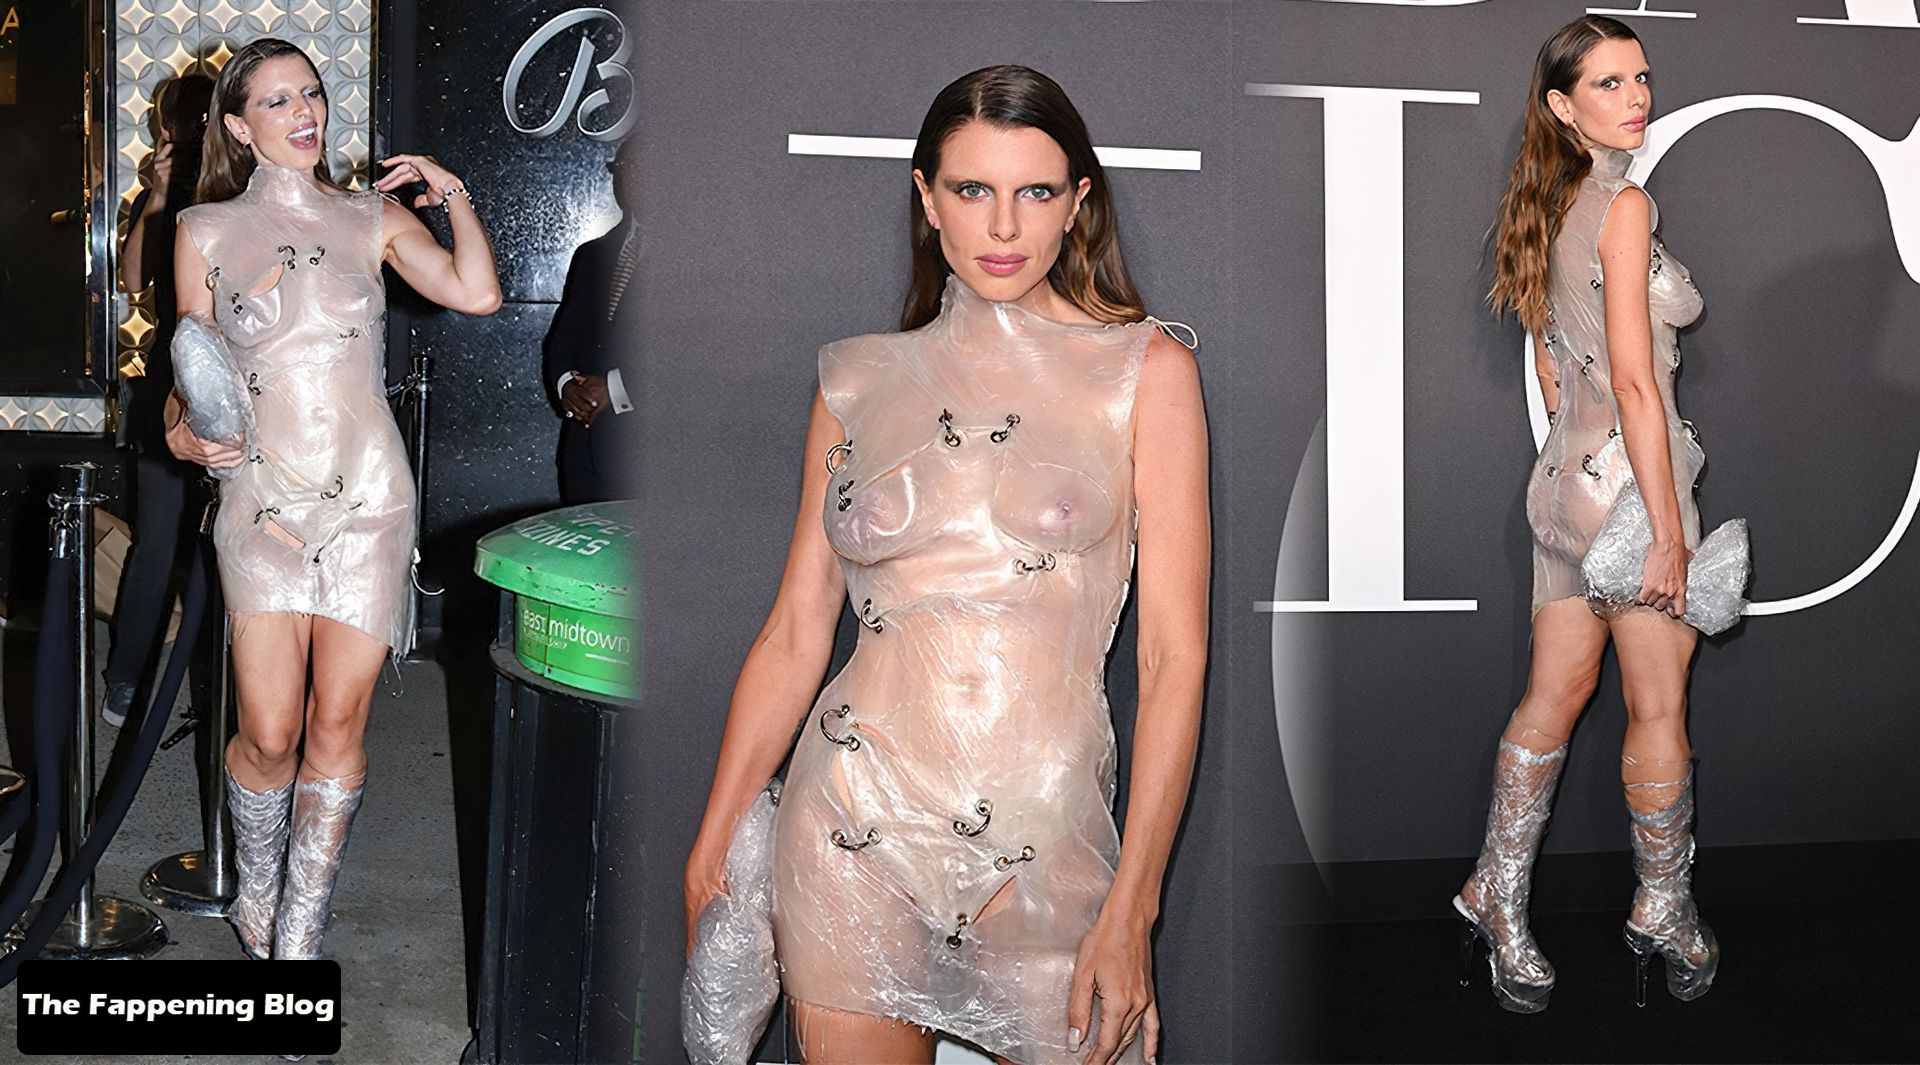 Julia Fox Braless Tits in Sheer Outfit 1 thefappeningblog.com  - Julia Fox Wears an Outlandish See-Through Tape Outfit at Harper’s Bazaar Party (48 Photos)